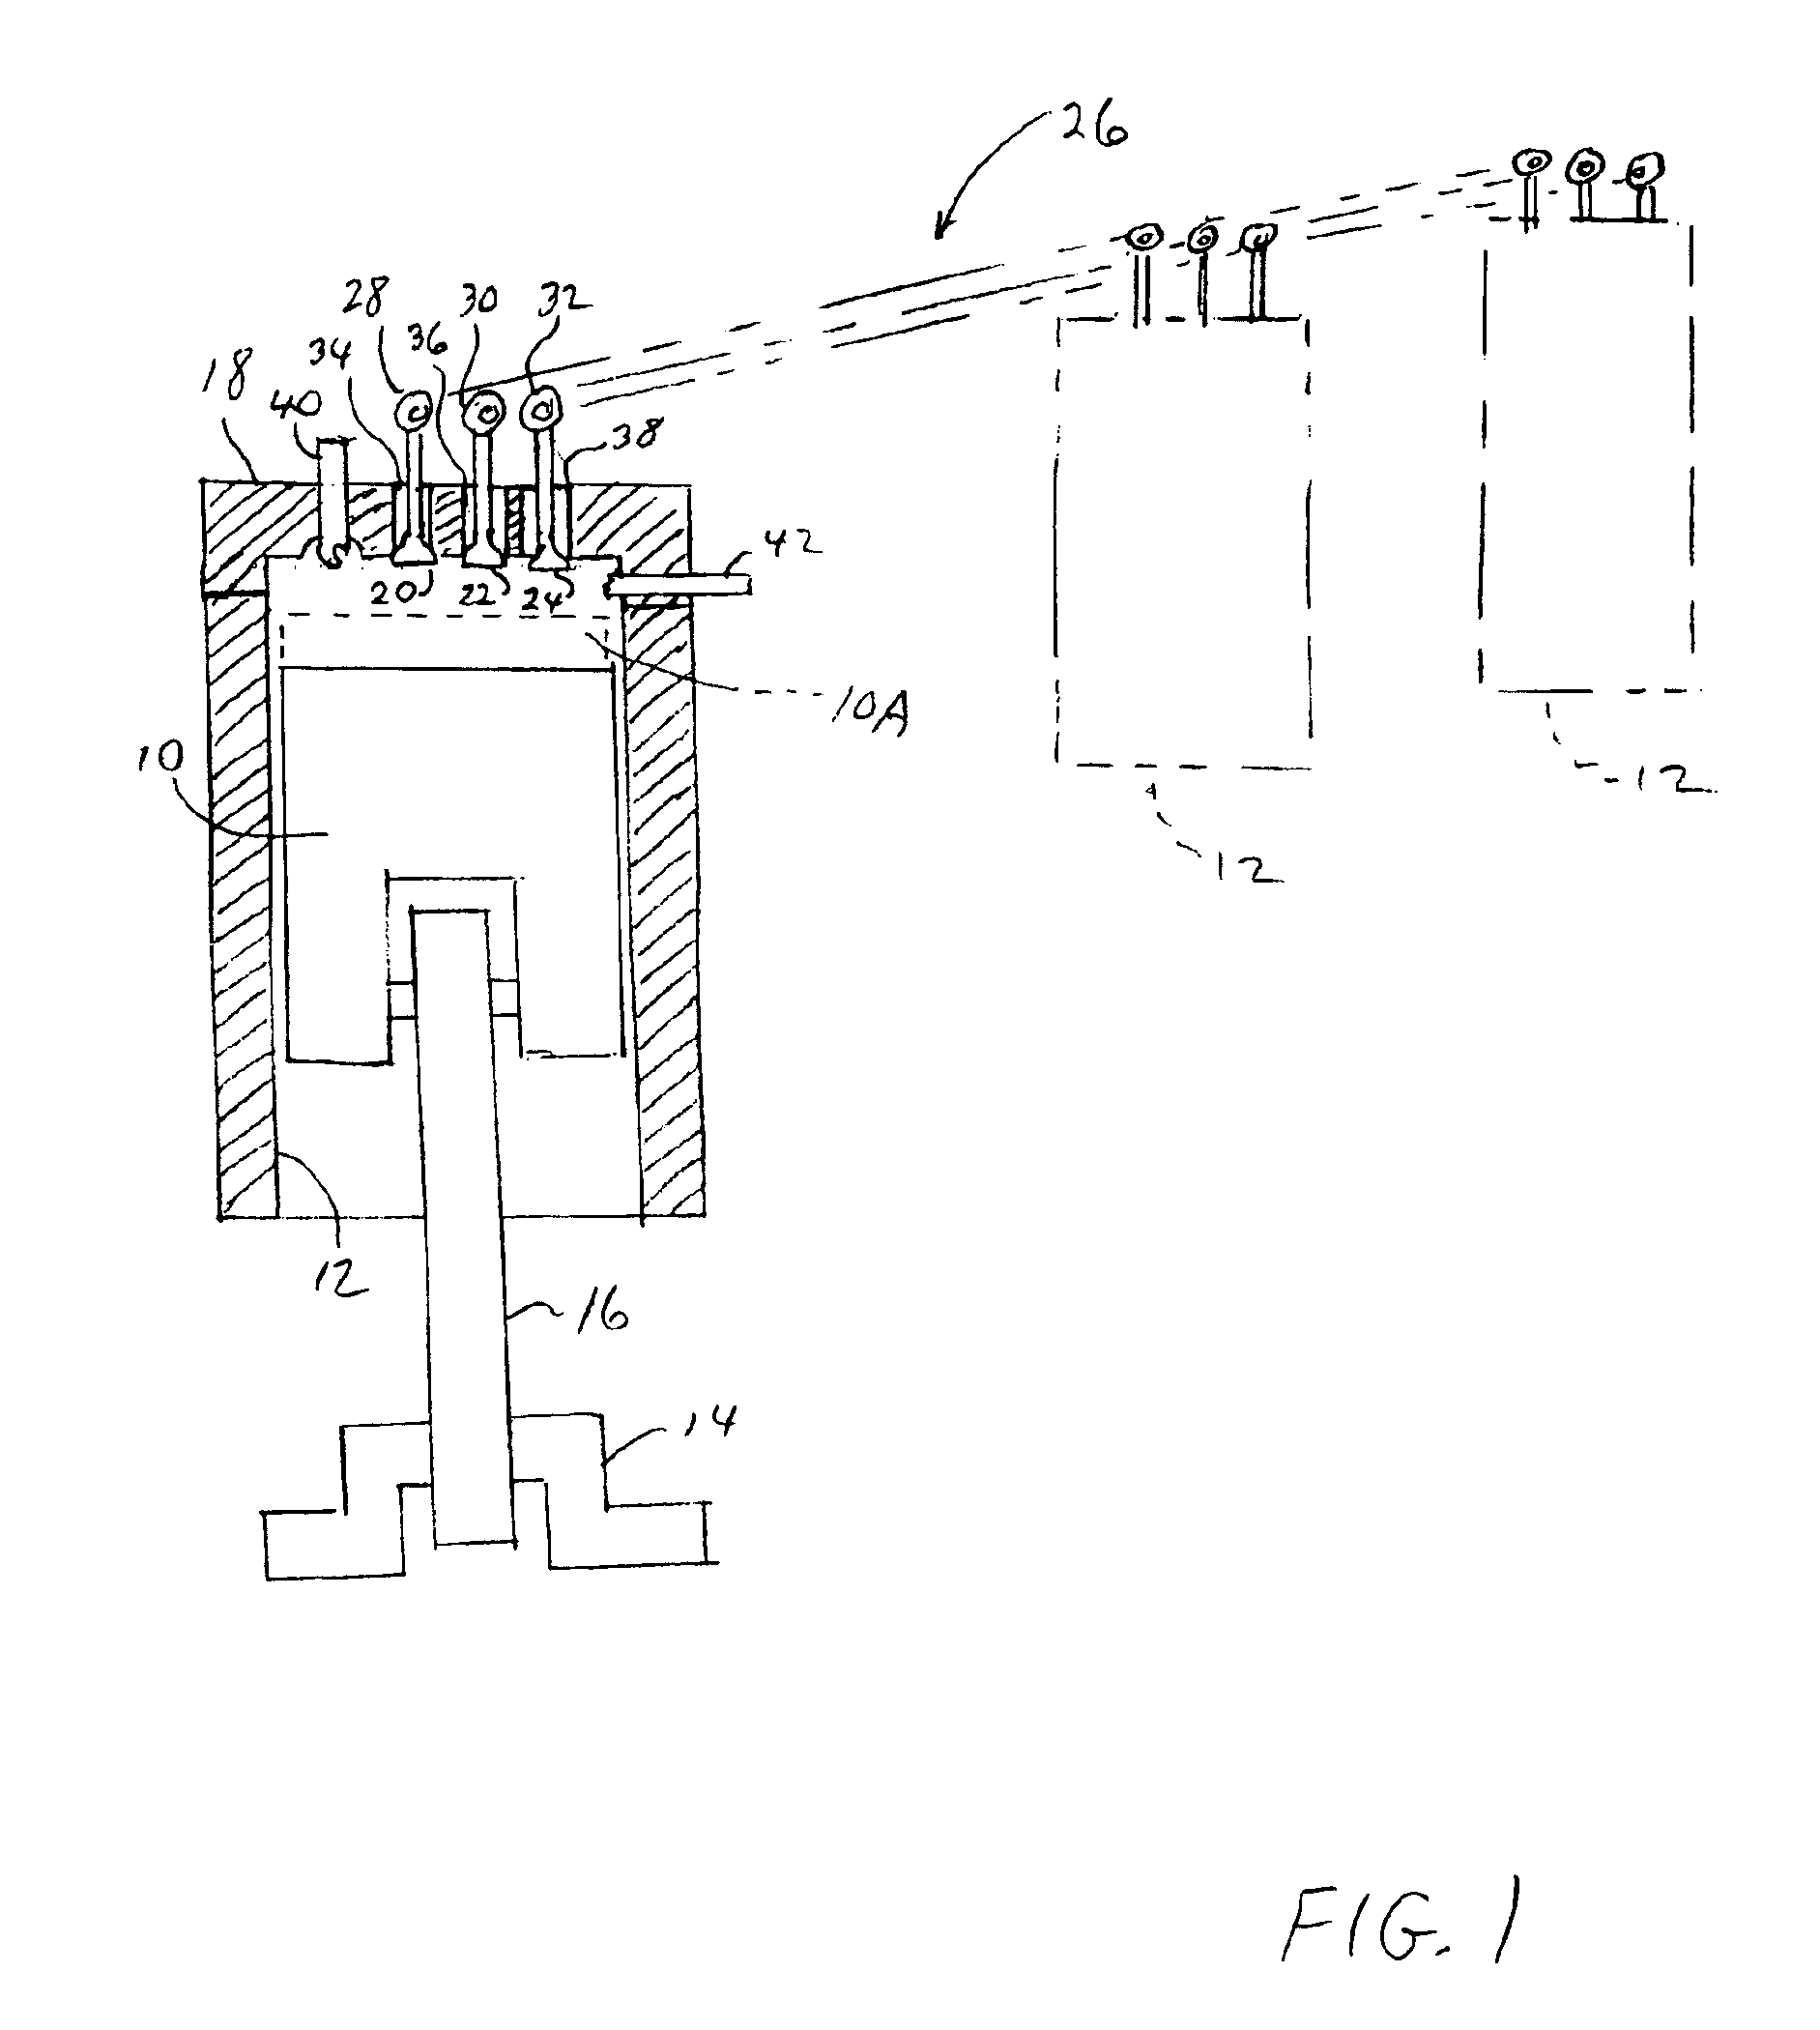 Internal combustion engine with elevated expansion ratio